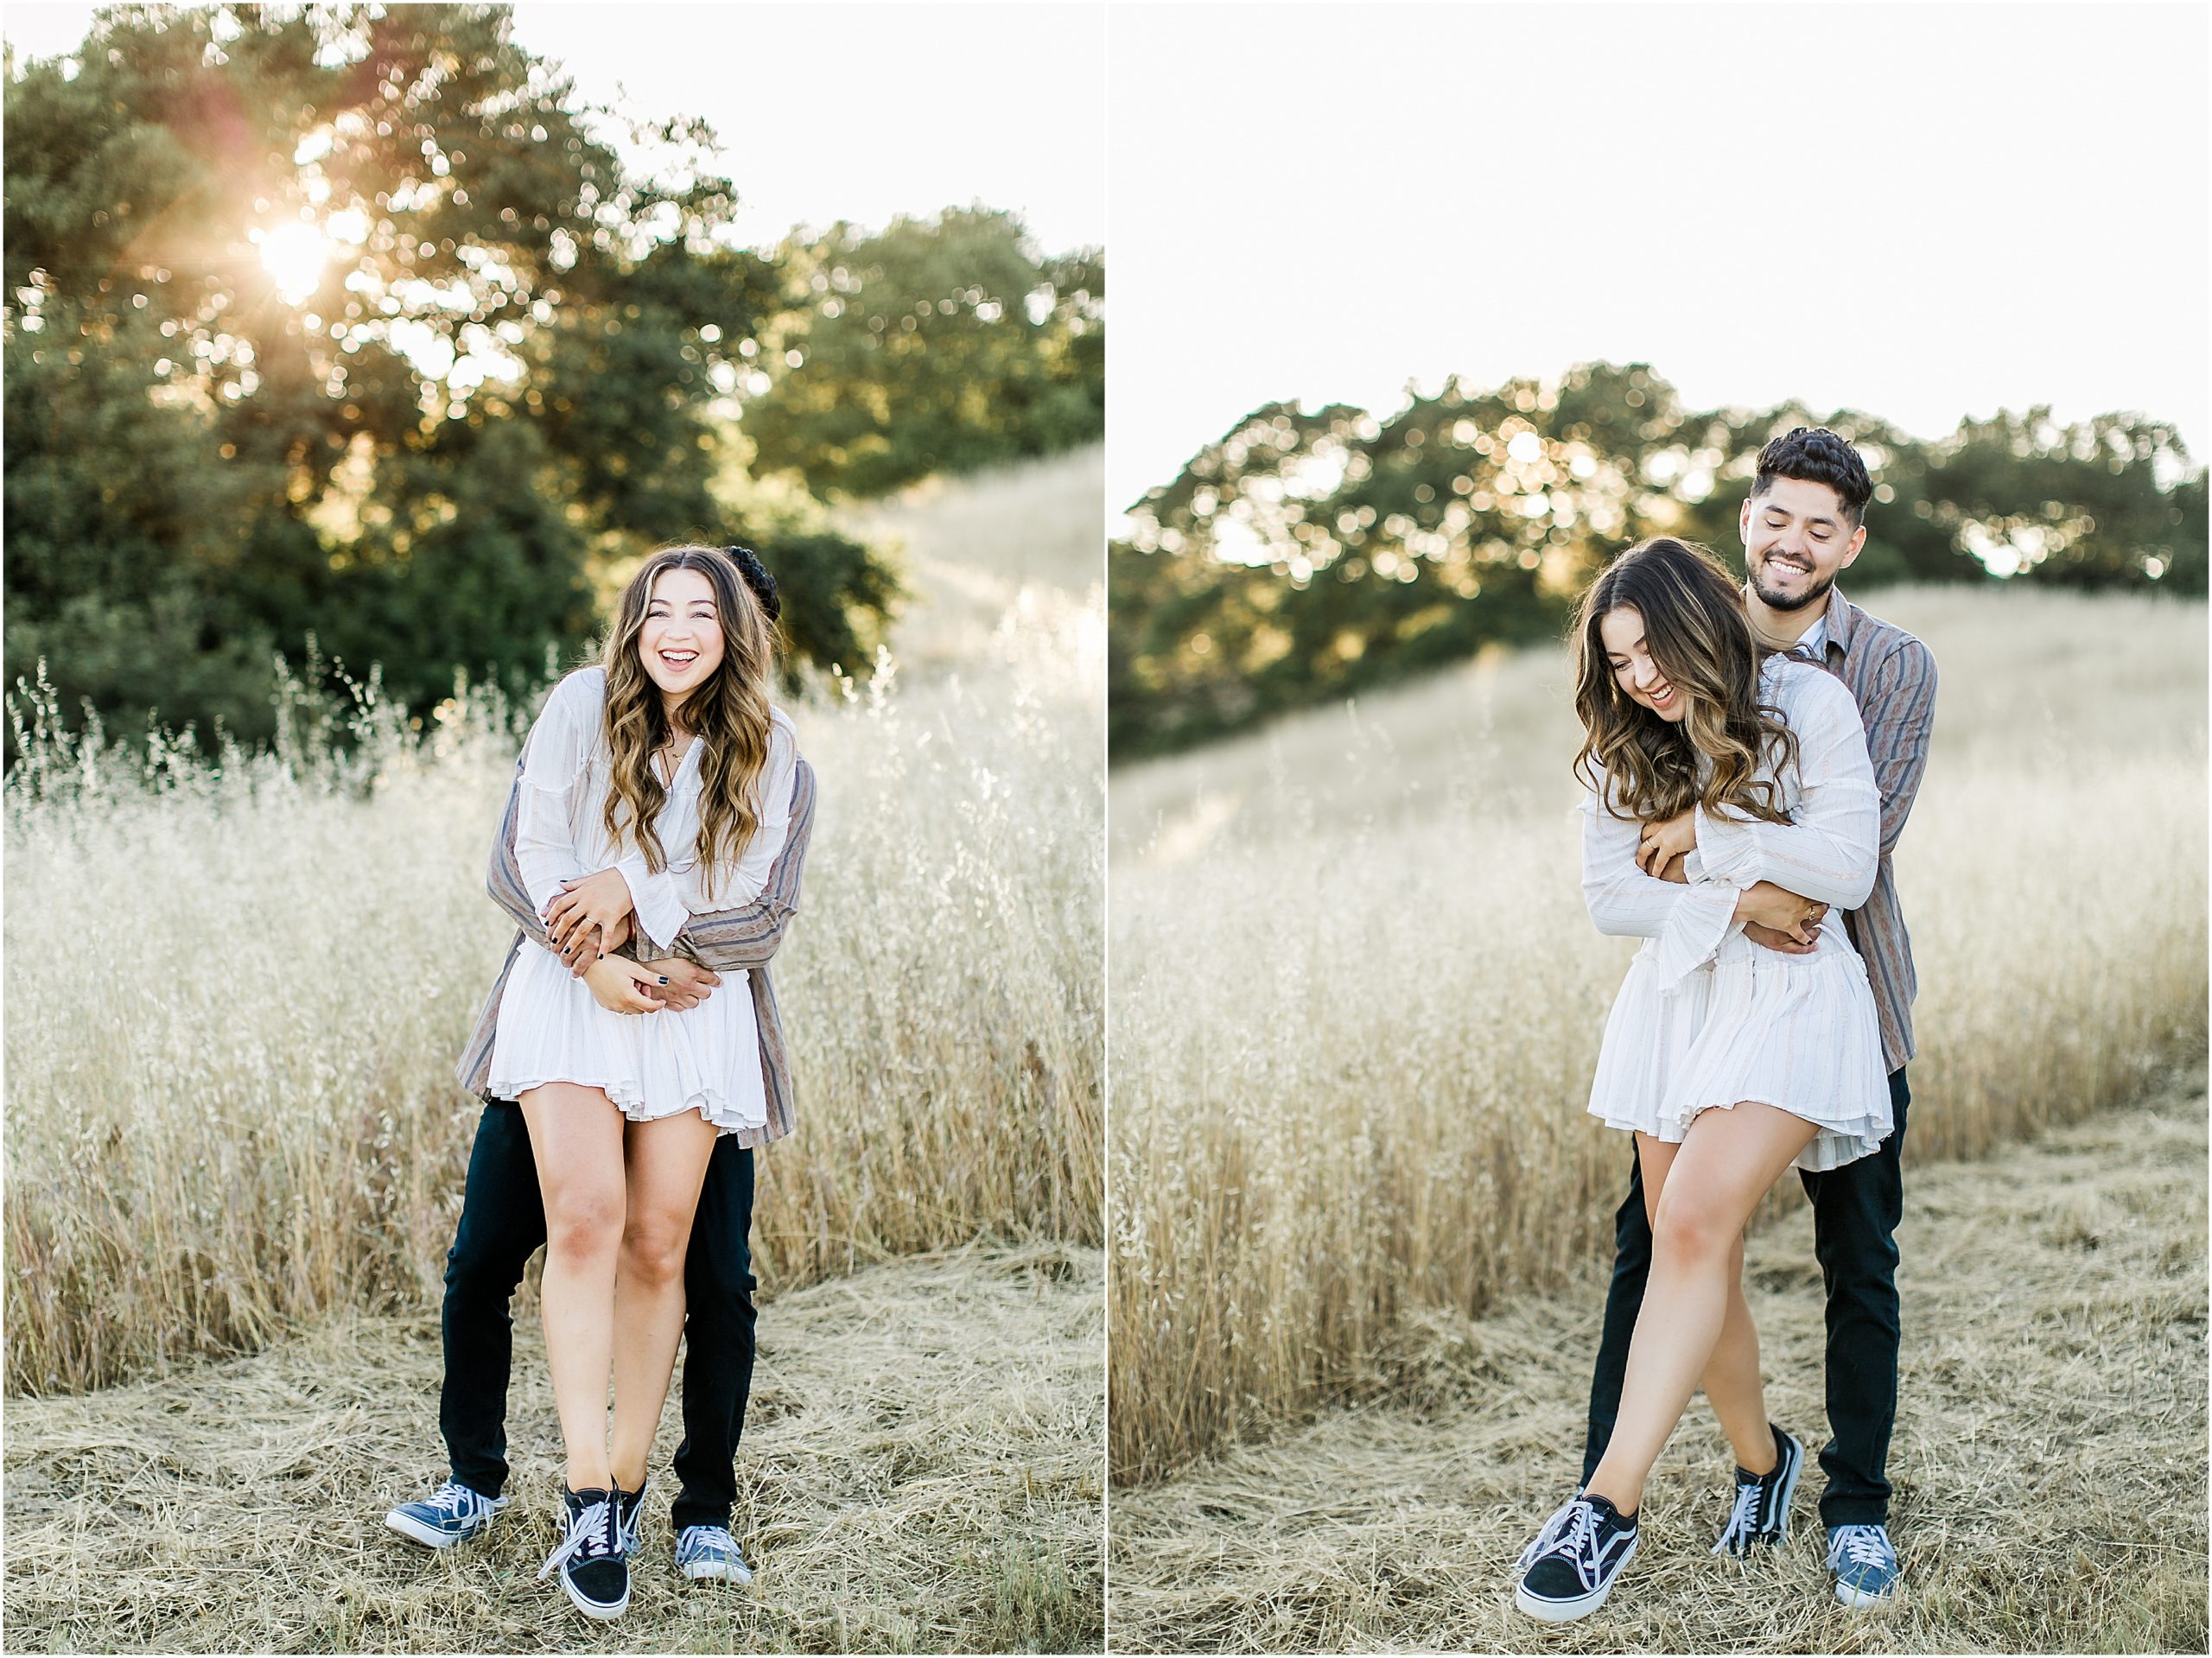 summertime engagement session in the golden hills of sonoma county taken by amy jordan photography